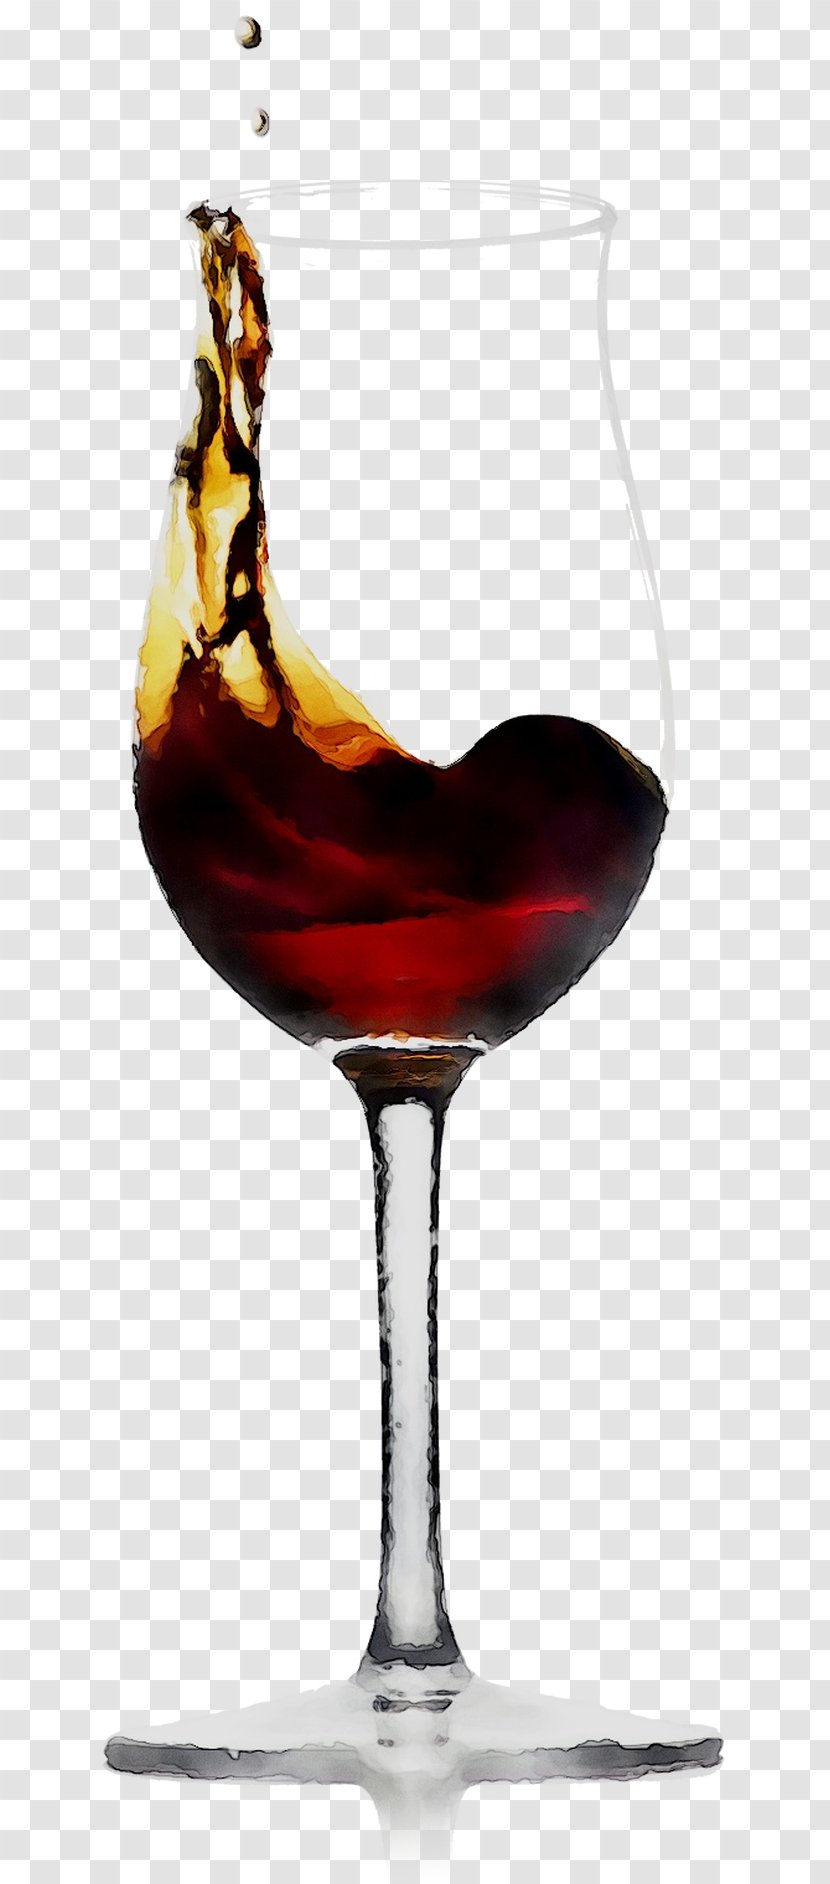 Wine Glass Champagne Alcoholic Beverages Drink - Tableware - Alcohol Transparent PNG